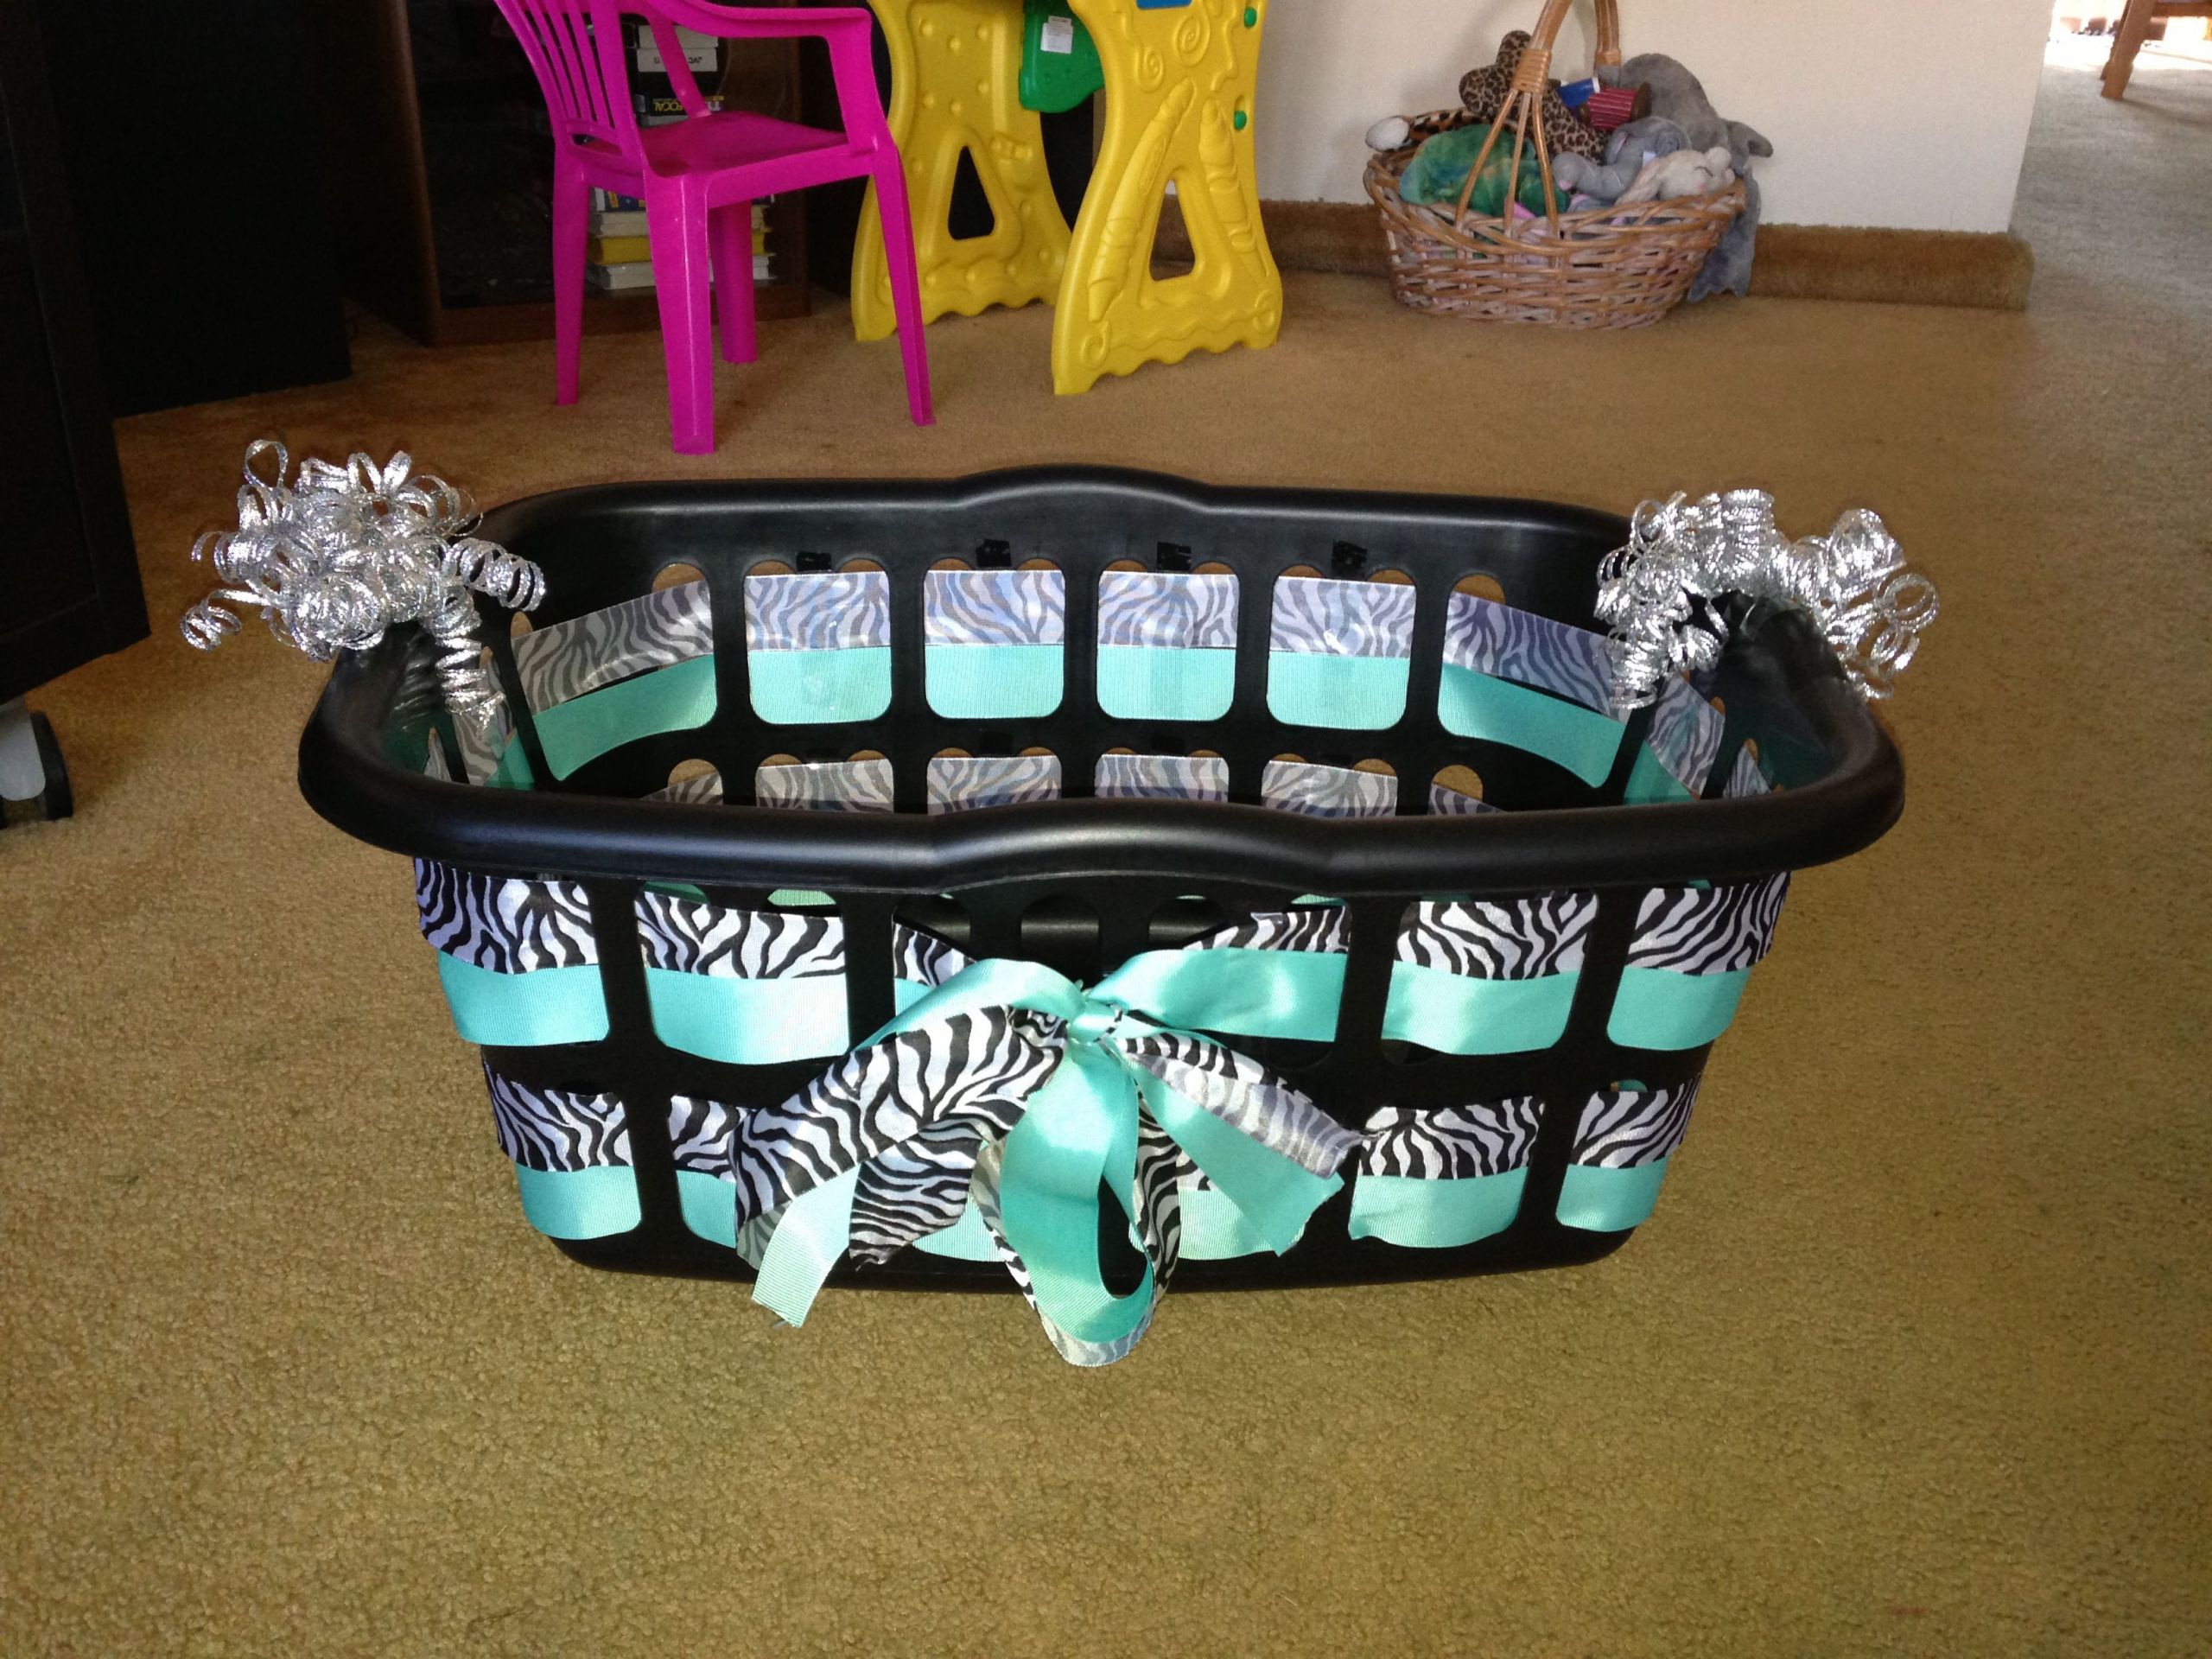 Gift Basket Decoration Ideas
 Cute way to decorate the basket Fill it with stuff for a